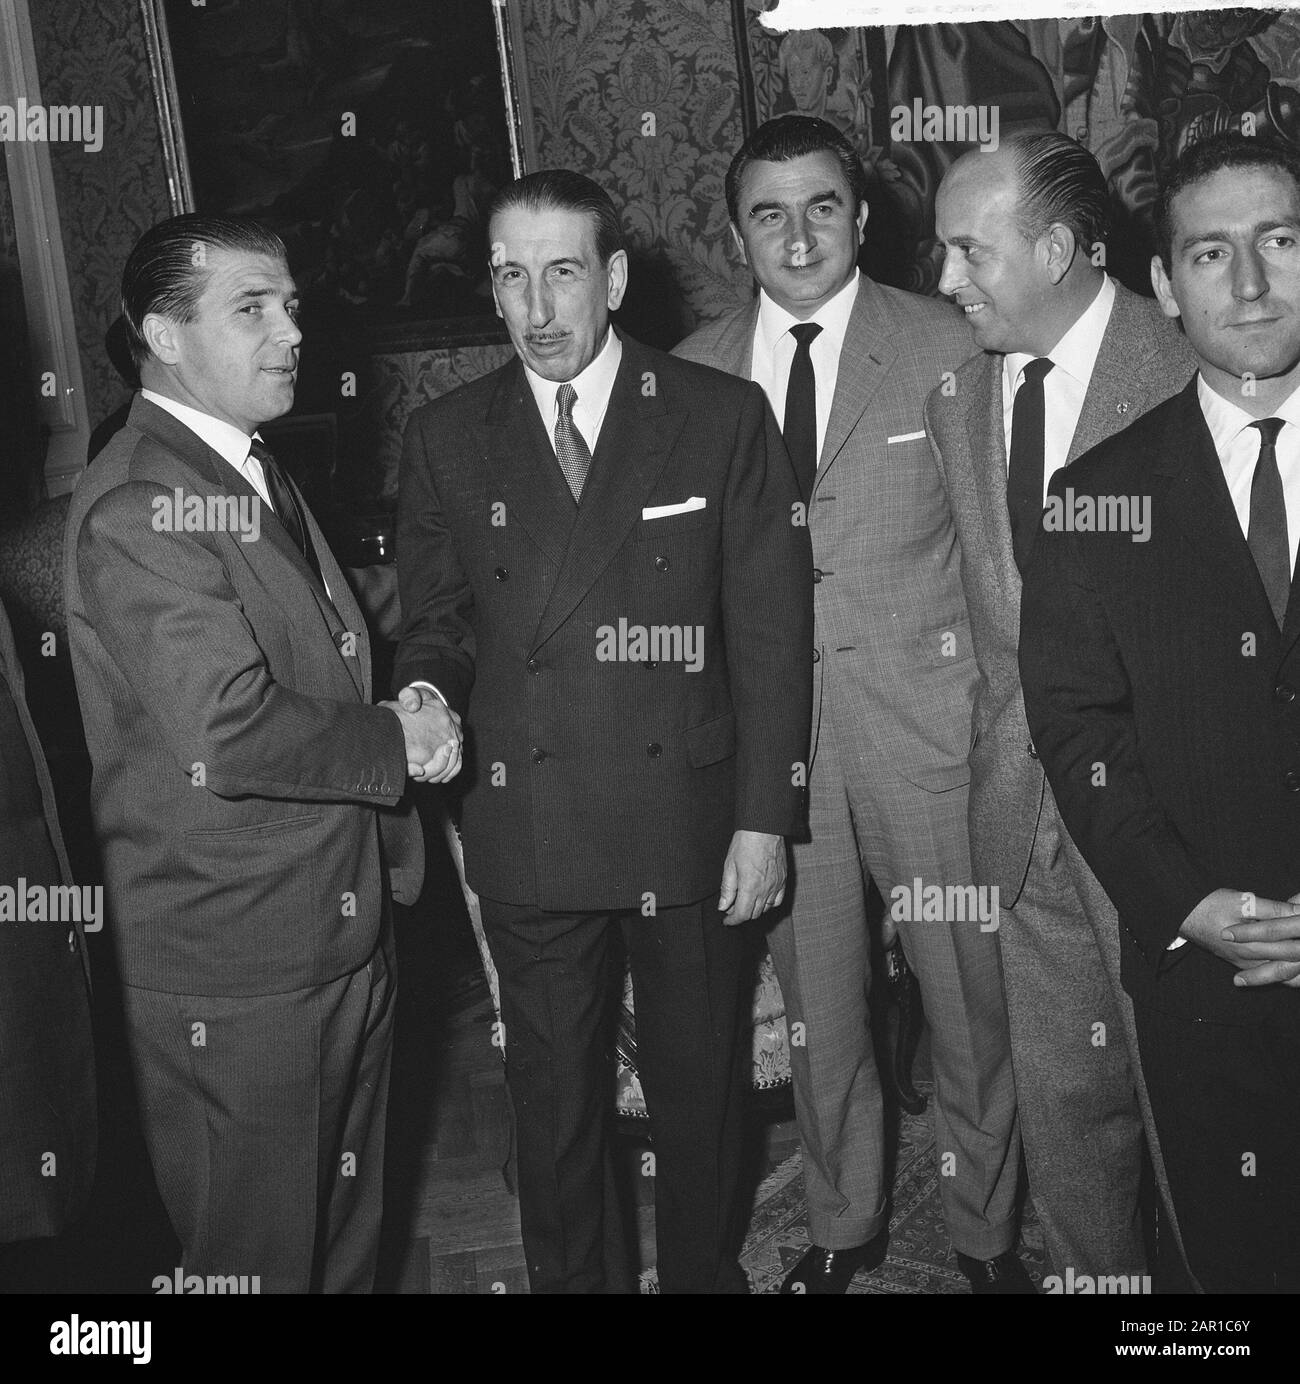 Real Madrid at Spanish Embassy in The Hague, Puskas and Spanish Ambassador Date: September 6, 1965 Location: The Hague, Spain Keywords: embassies, ambassadors, sport, football Name: Puskas, Ferenc Institution name: Real Madrid Stock Photo